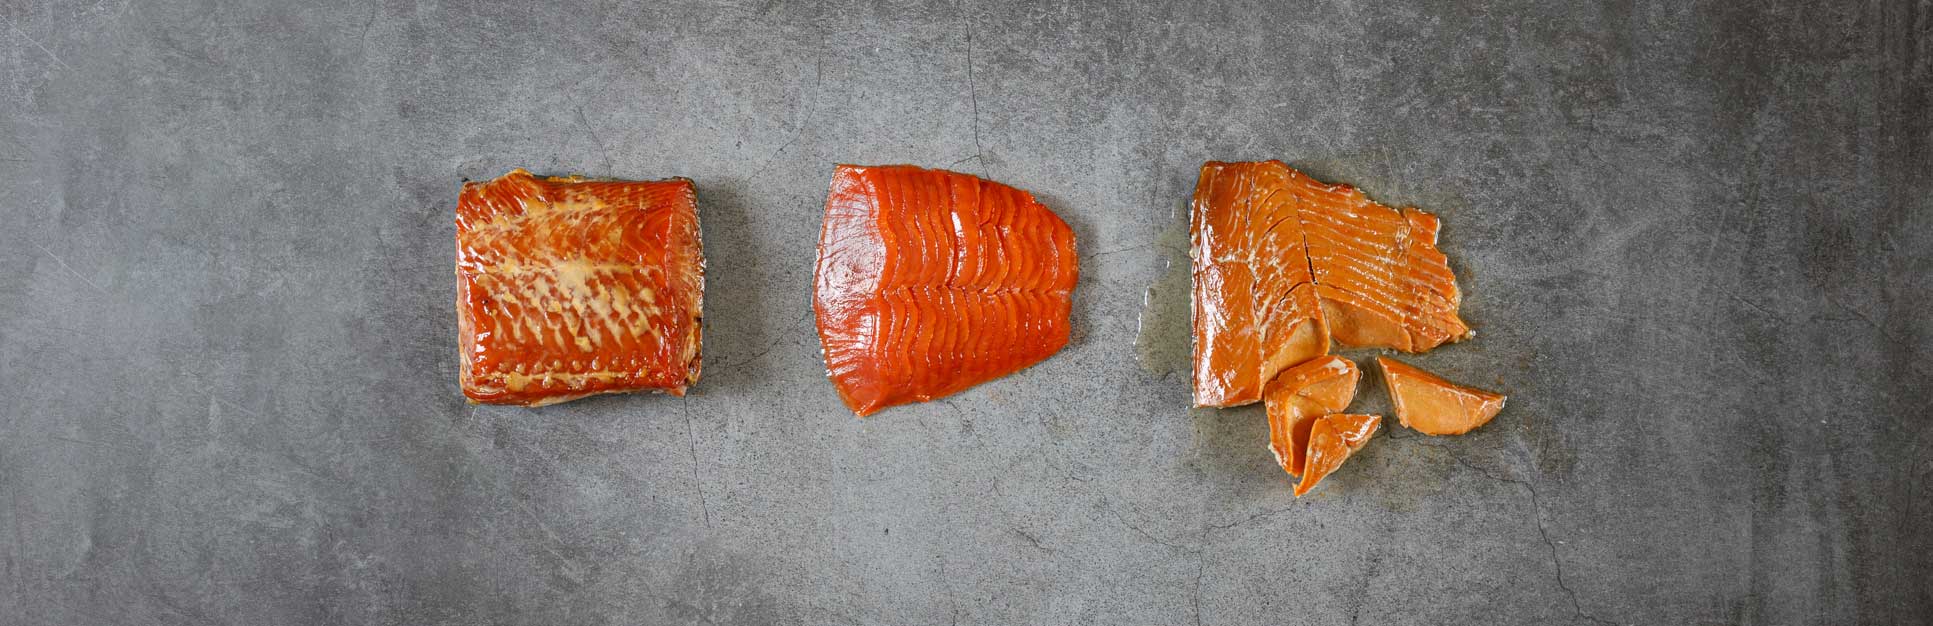 Three fillets of smoked salmon on a grey cement surface